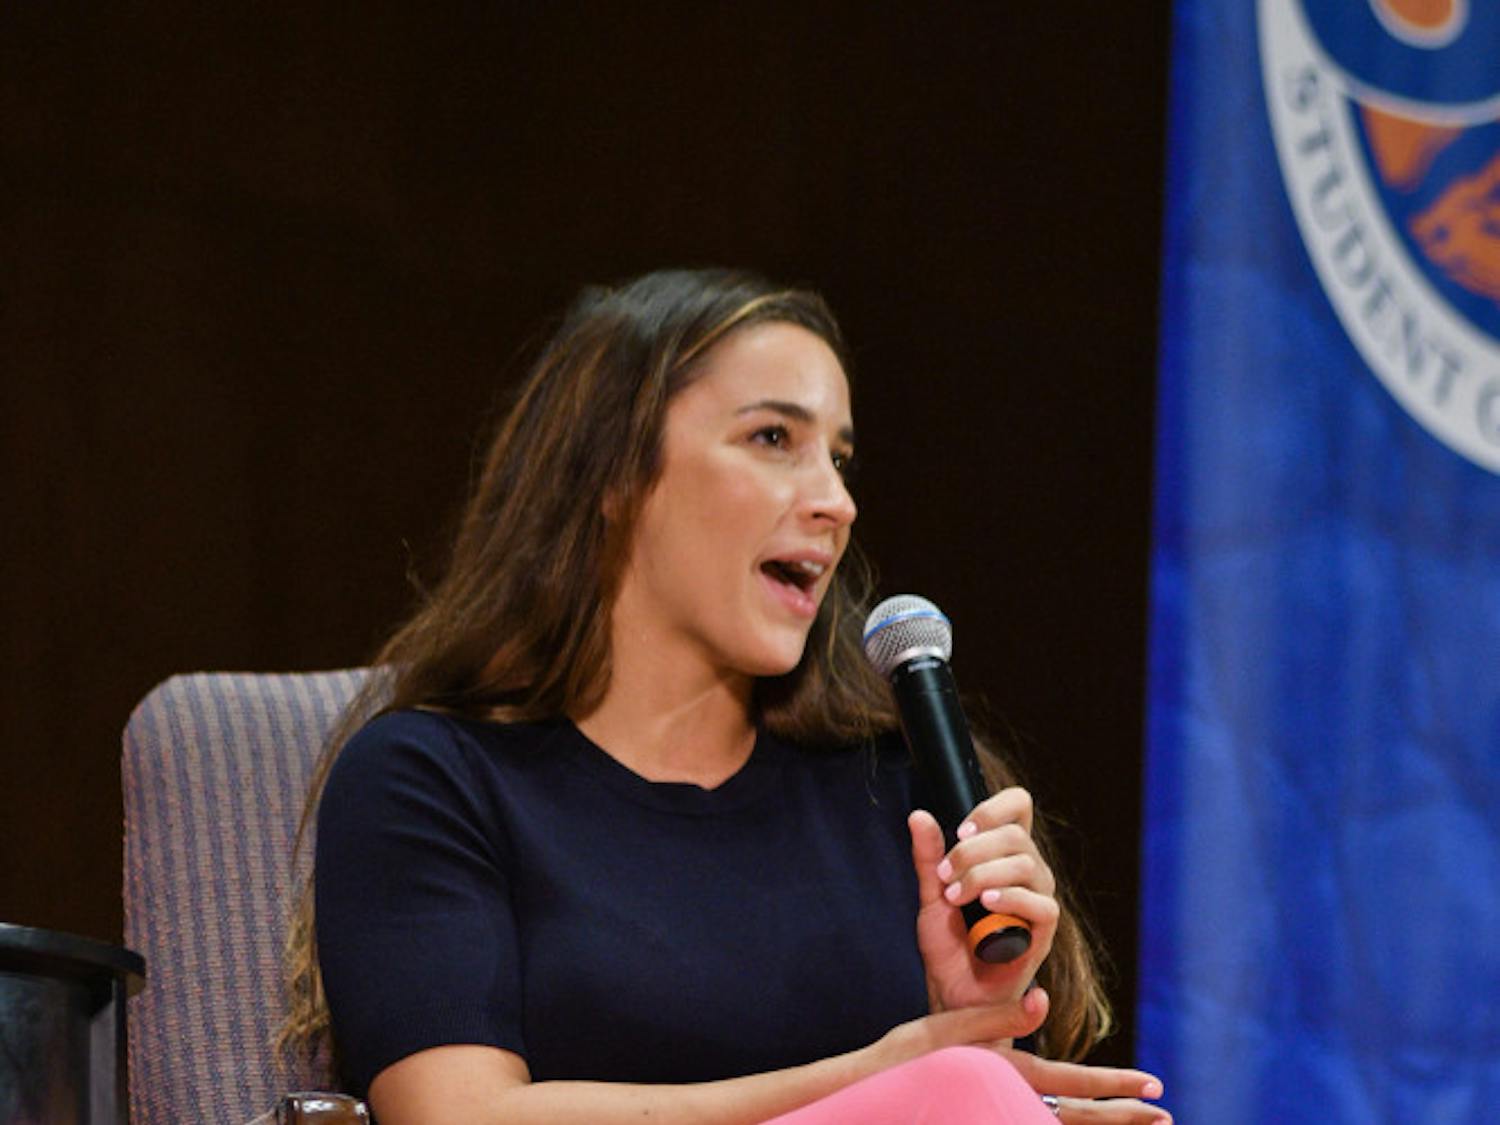 Aly Raisman, team captain of the gold medal-winning USA gymnastics team in 2012 and 2016, speaks Tuesday night at the University Auditorium. Raisman talked about her dream of becoming an Olympian and her training as well as the letter she wrote and read to her abuser Larry Nassar.  